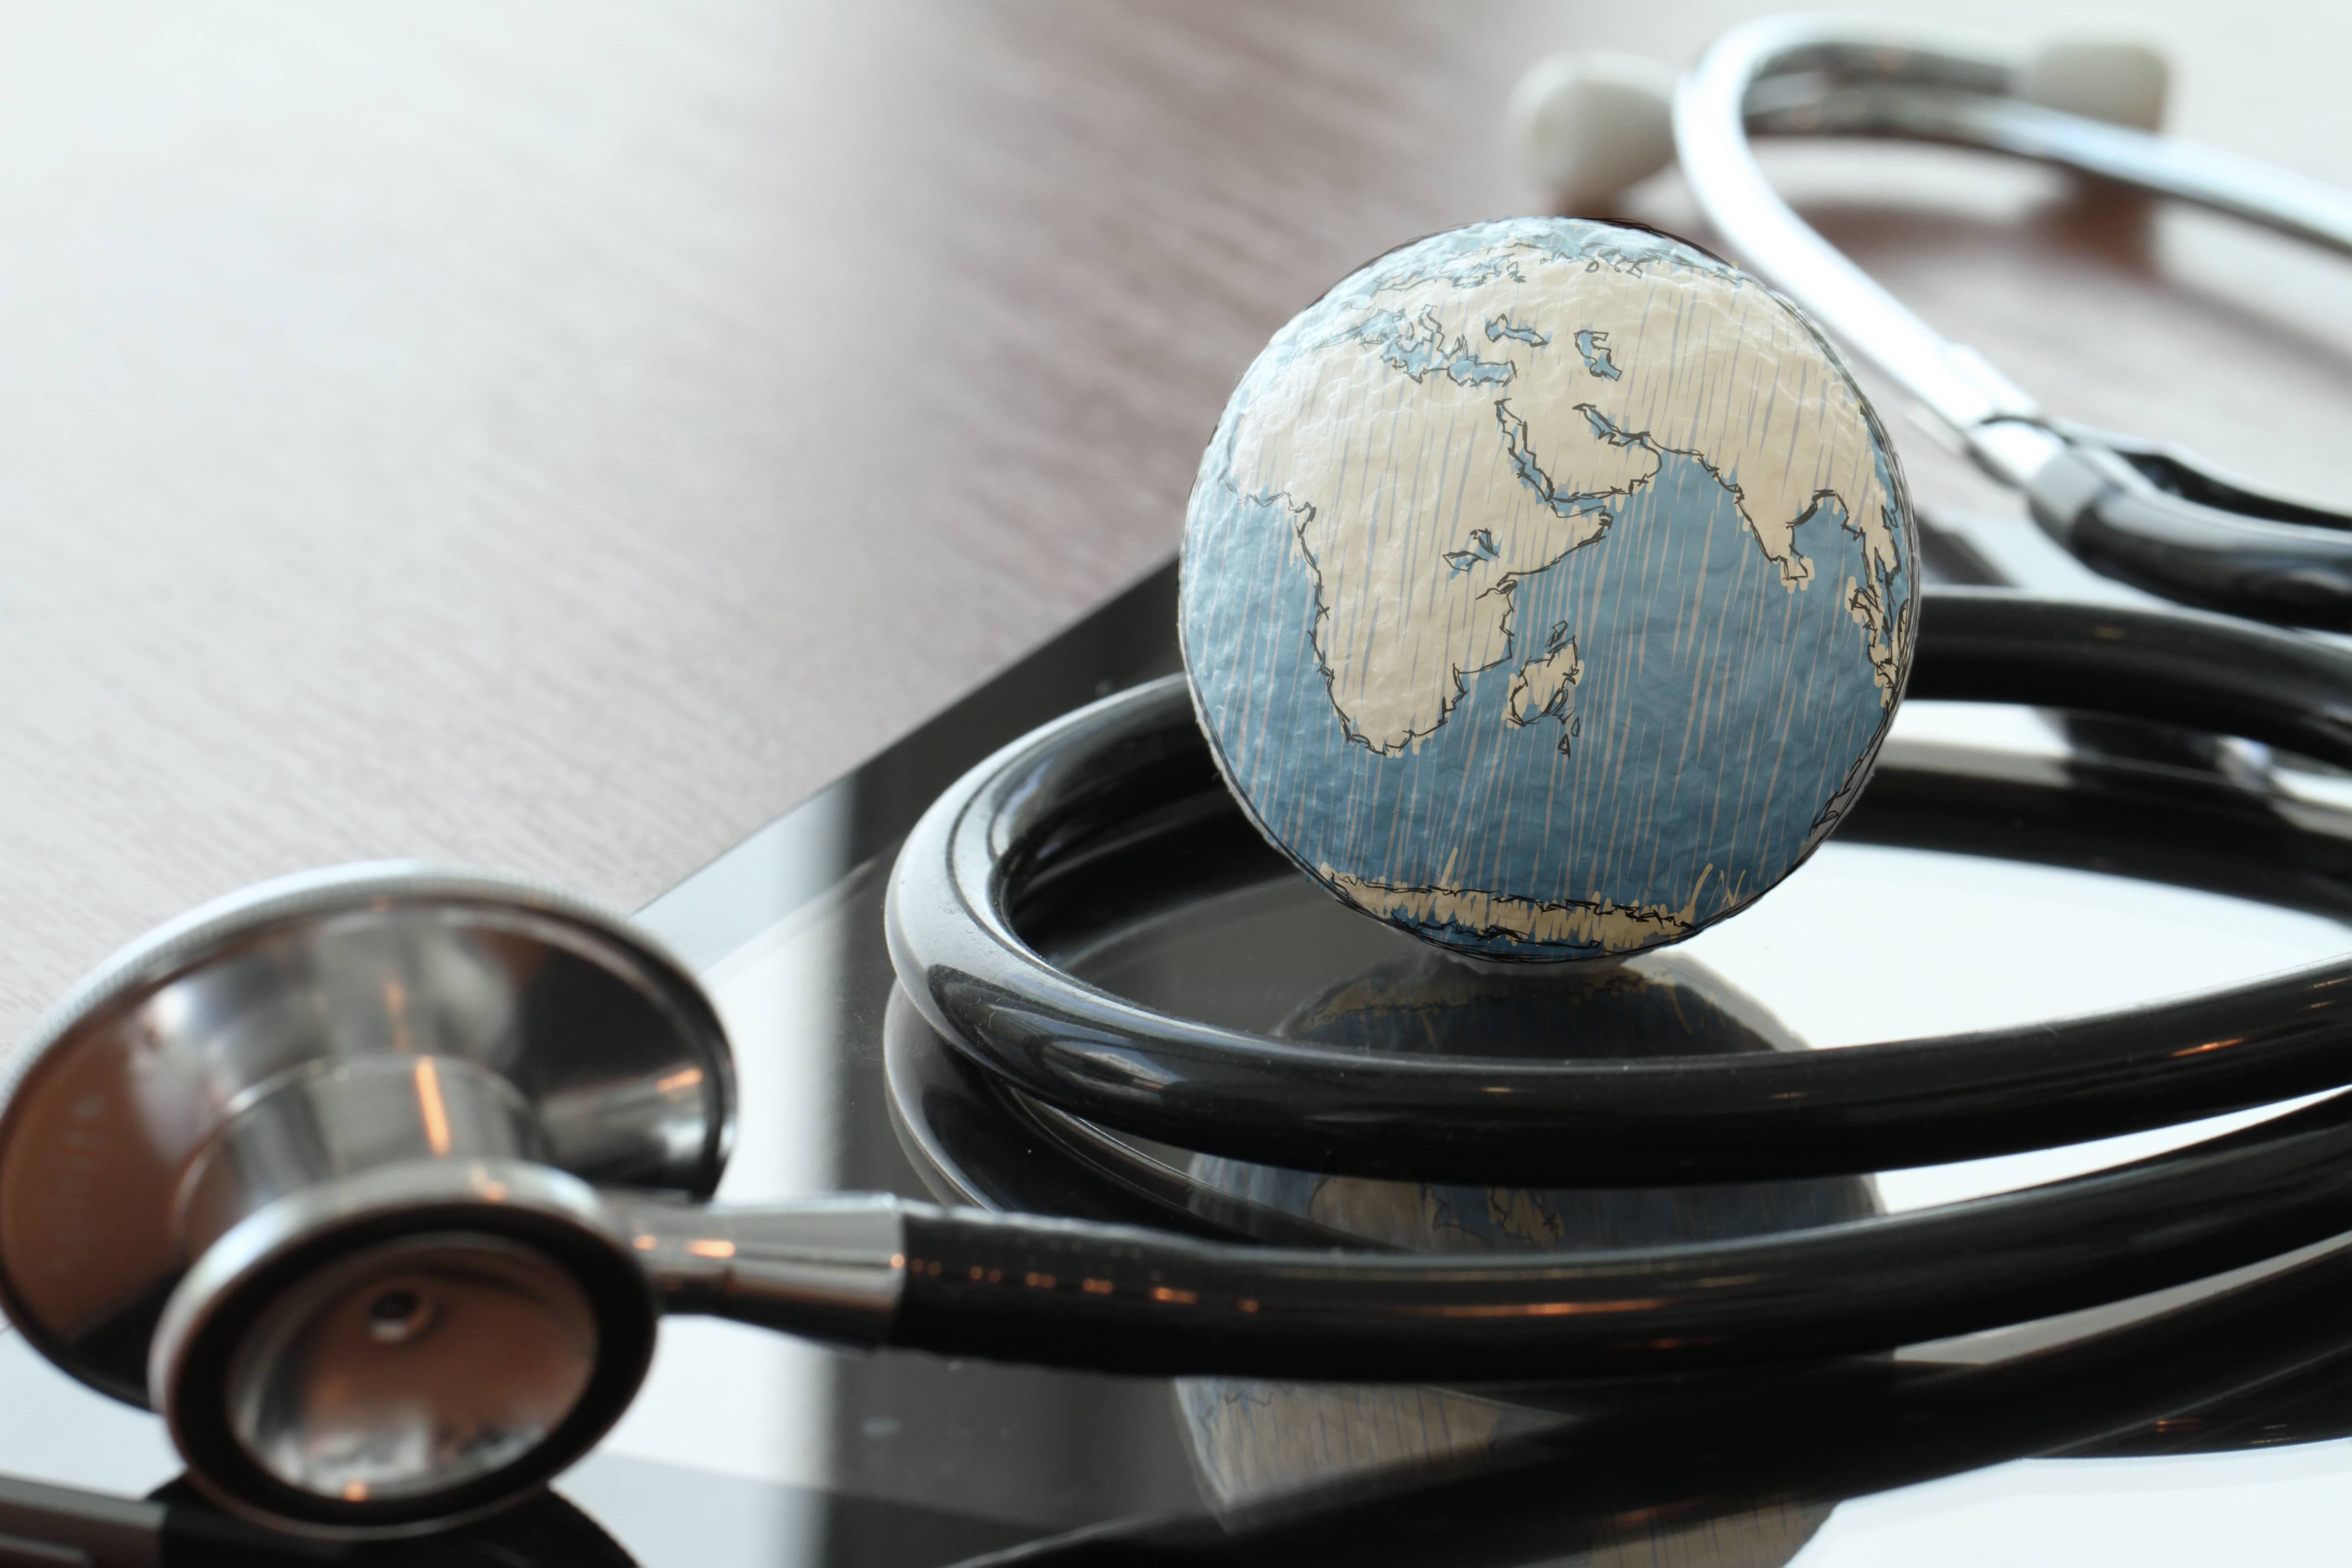 a stethoscope with a small globe resting on the table, too, representing world health